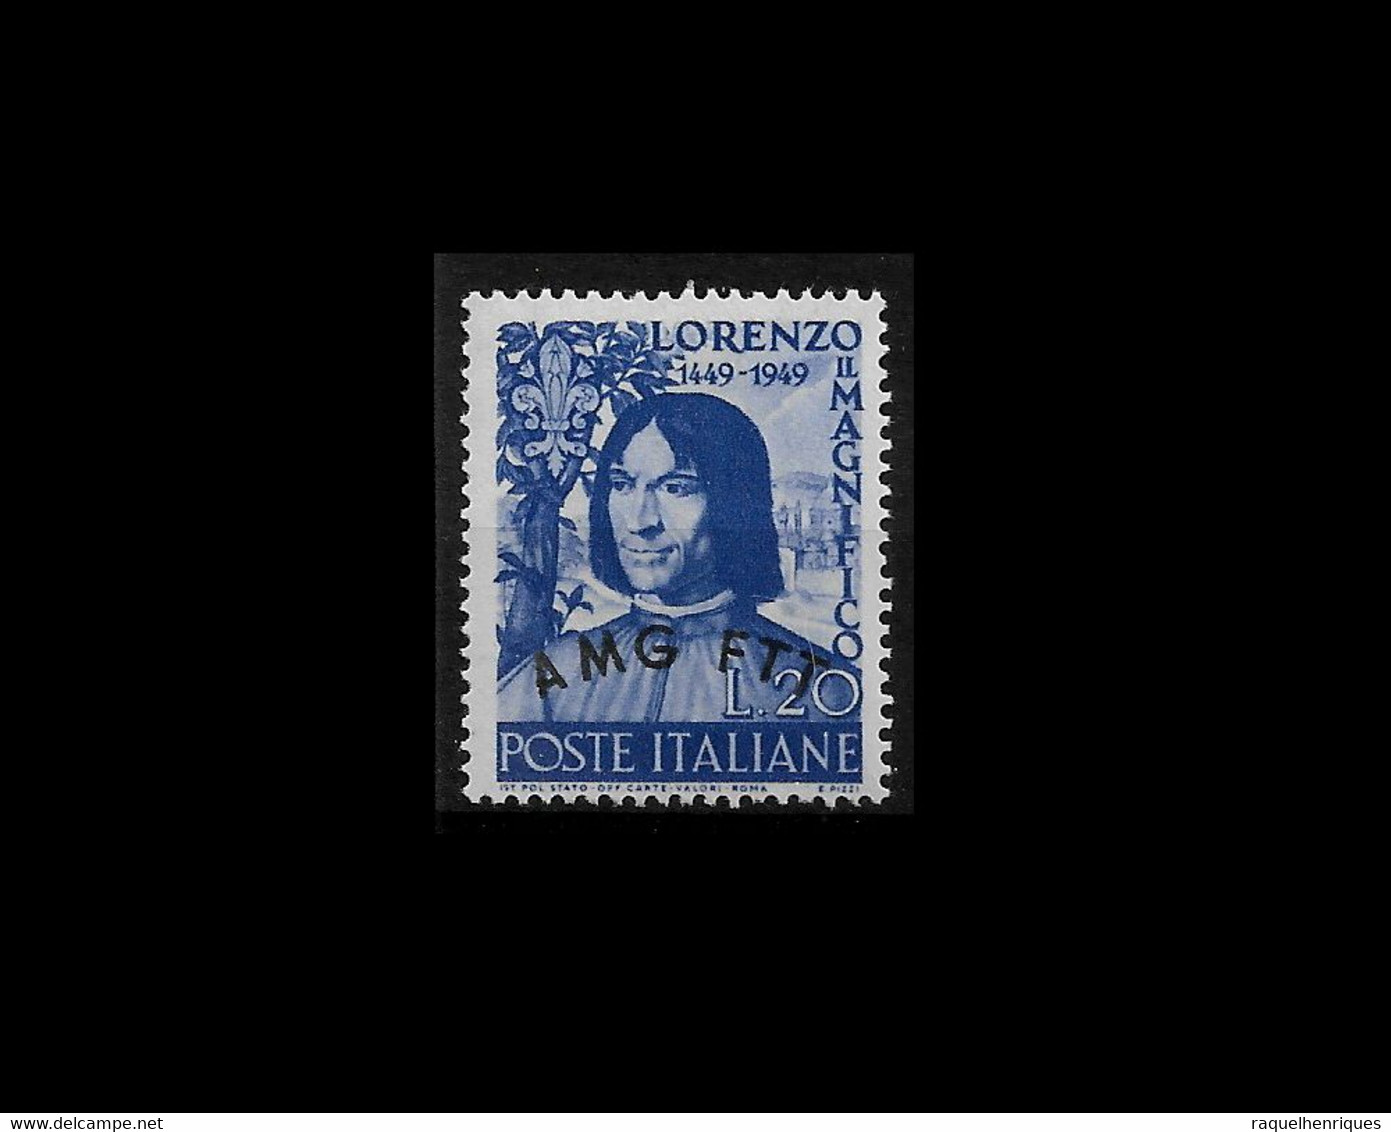 ITALY STAMP - TRIESTE ZONE A - 1949 The 500th An.Birth Of Lorenzo Medici - AMG FTT MH (BA5#58) - Egée (Autonome Adm.)